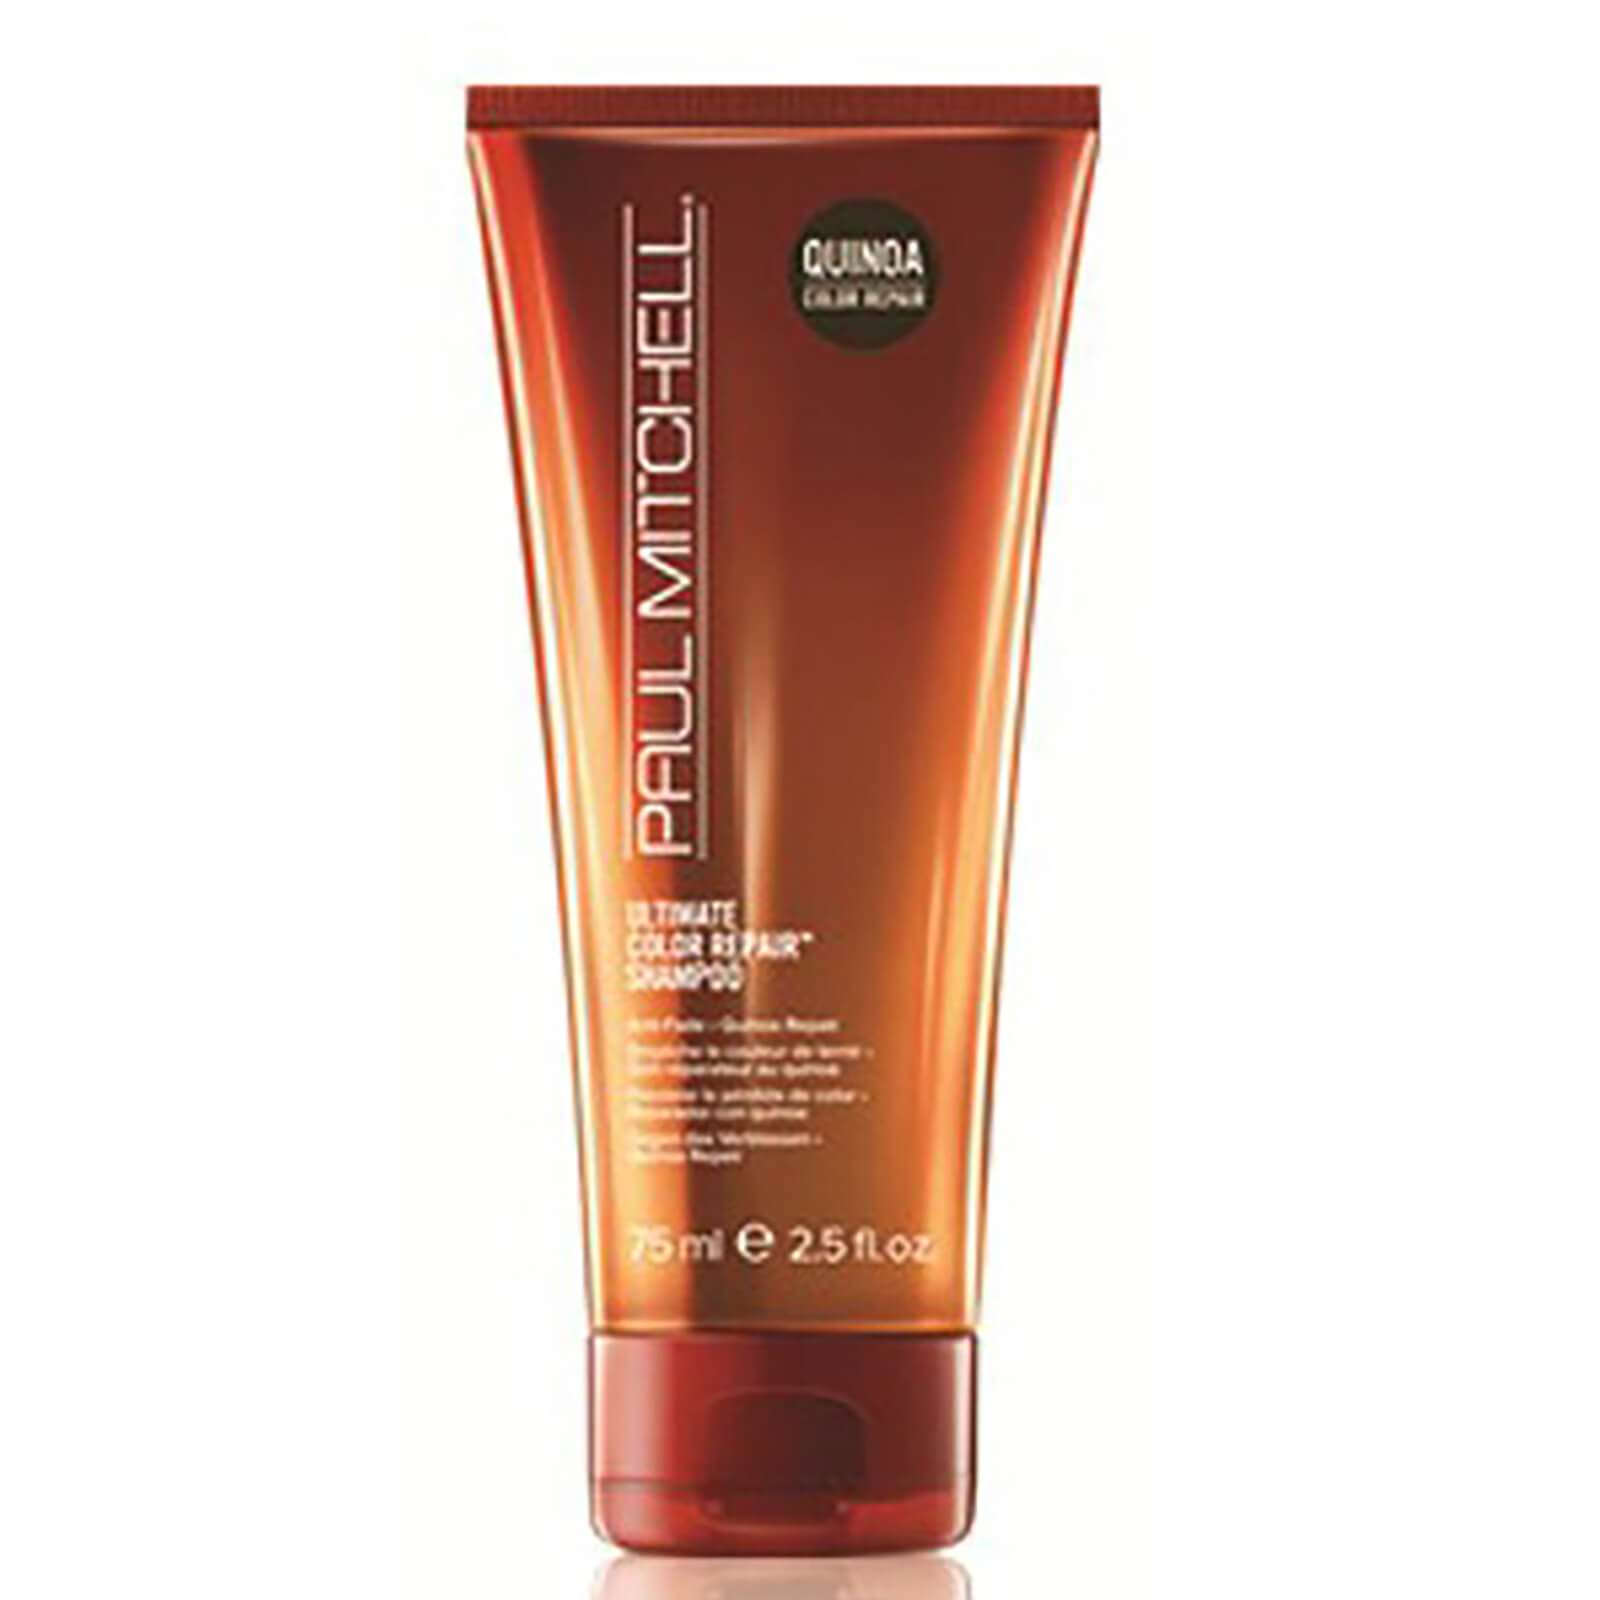 Paul Mitchell Ultimate Color Repair Shampoo